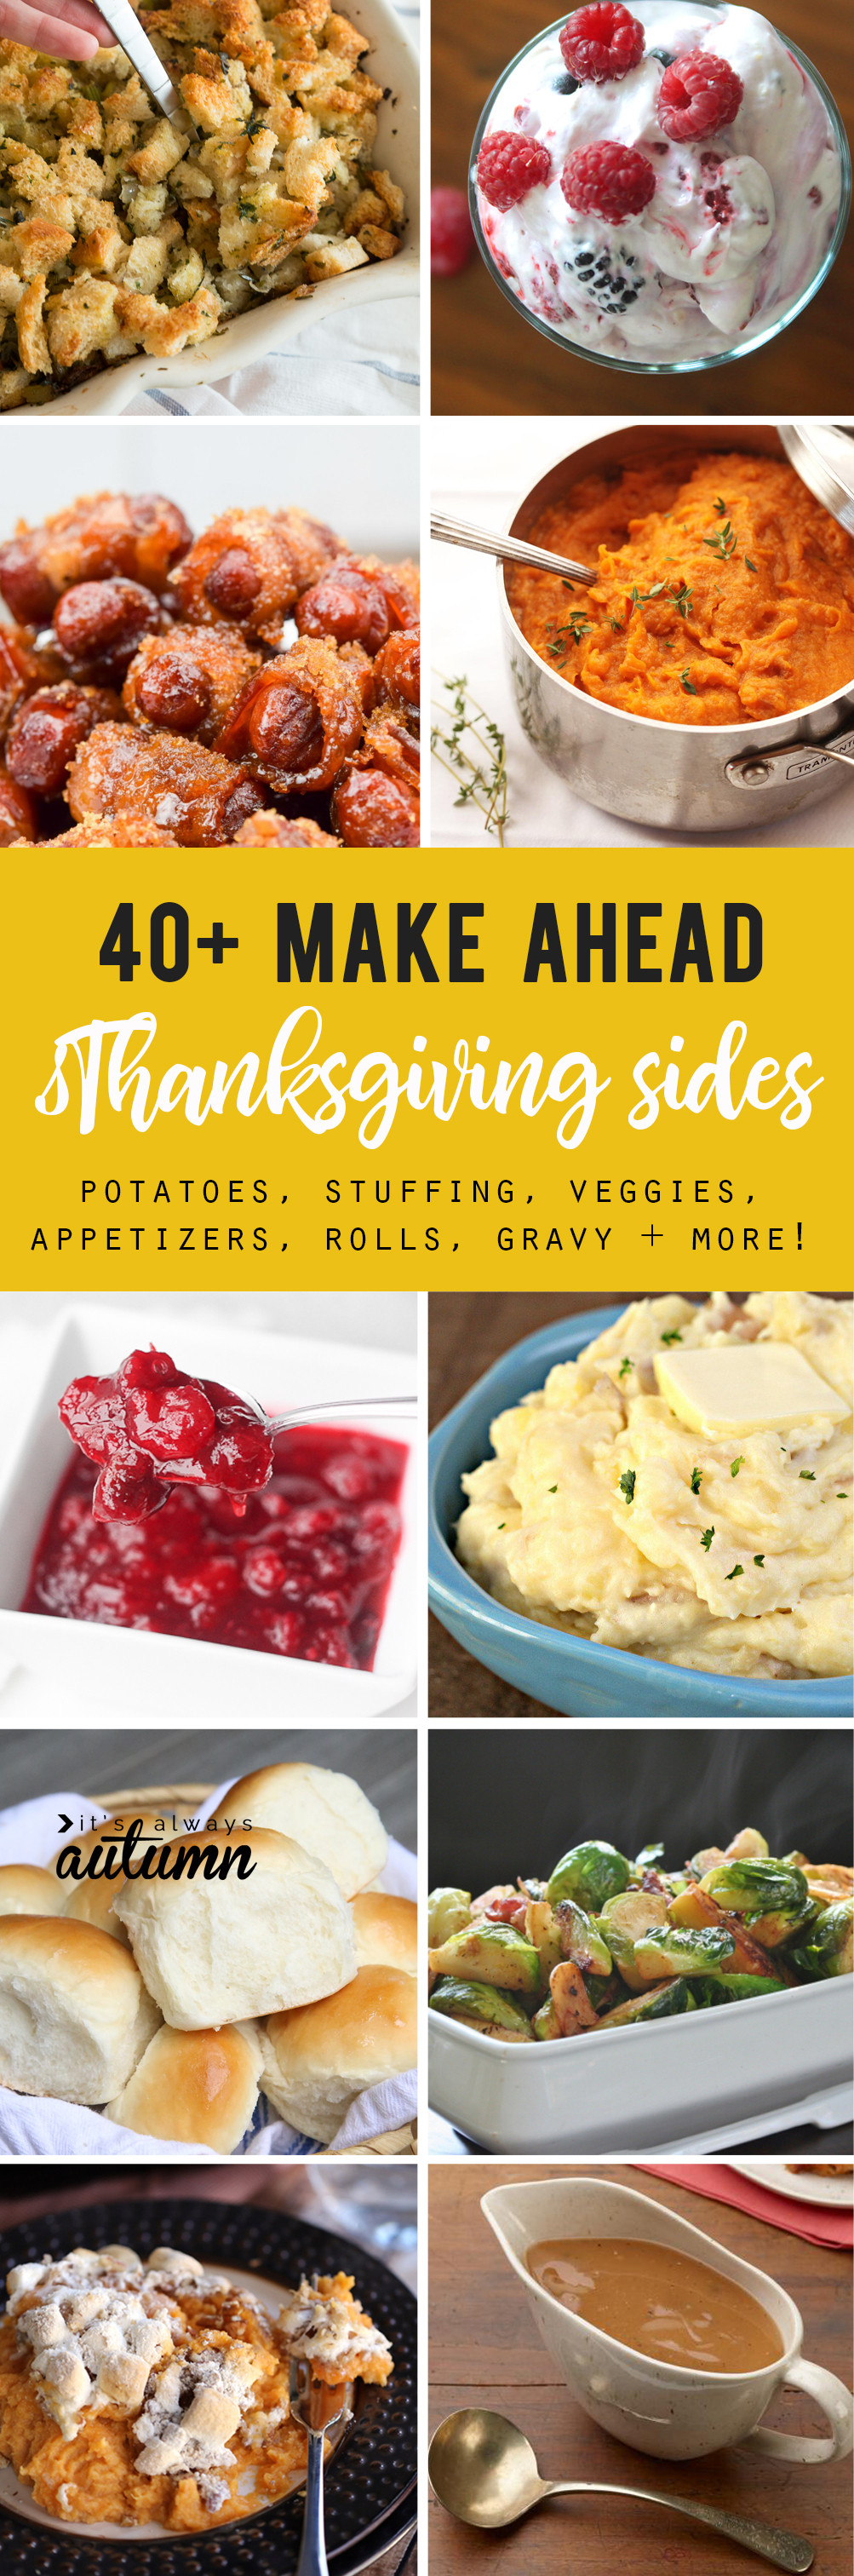 Make Ahead Dishes For Thanksgiving
 the BEST LIST of Thanksgiving side dishes you can make